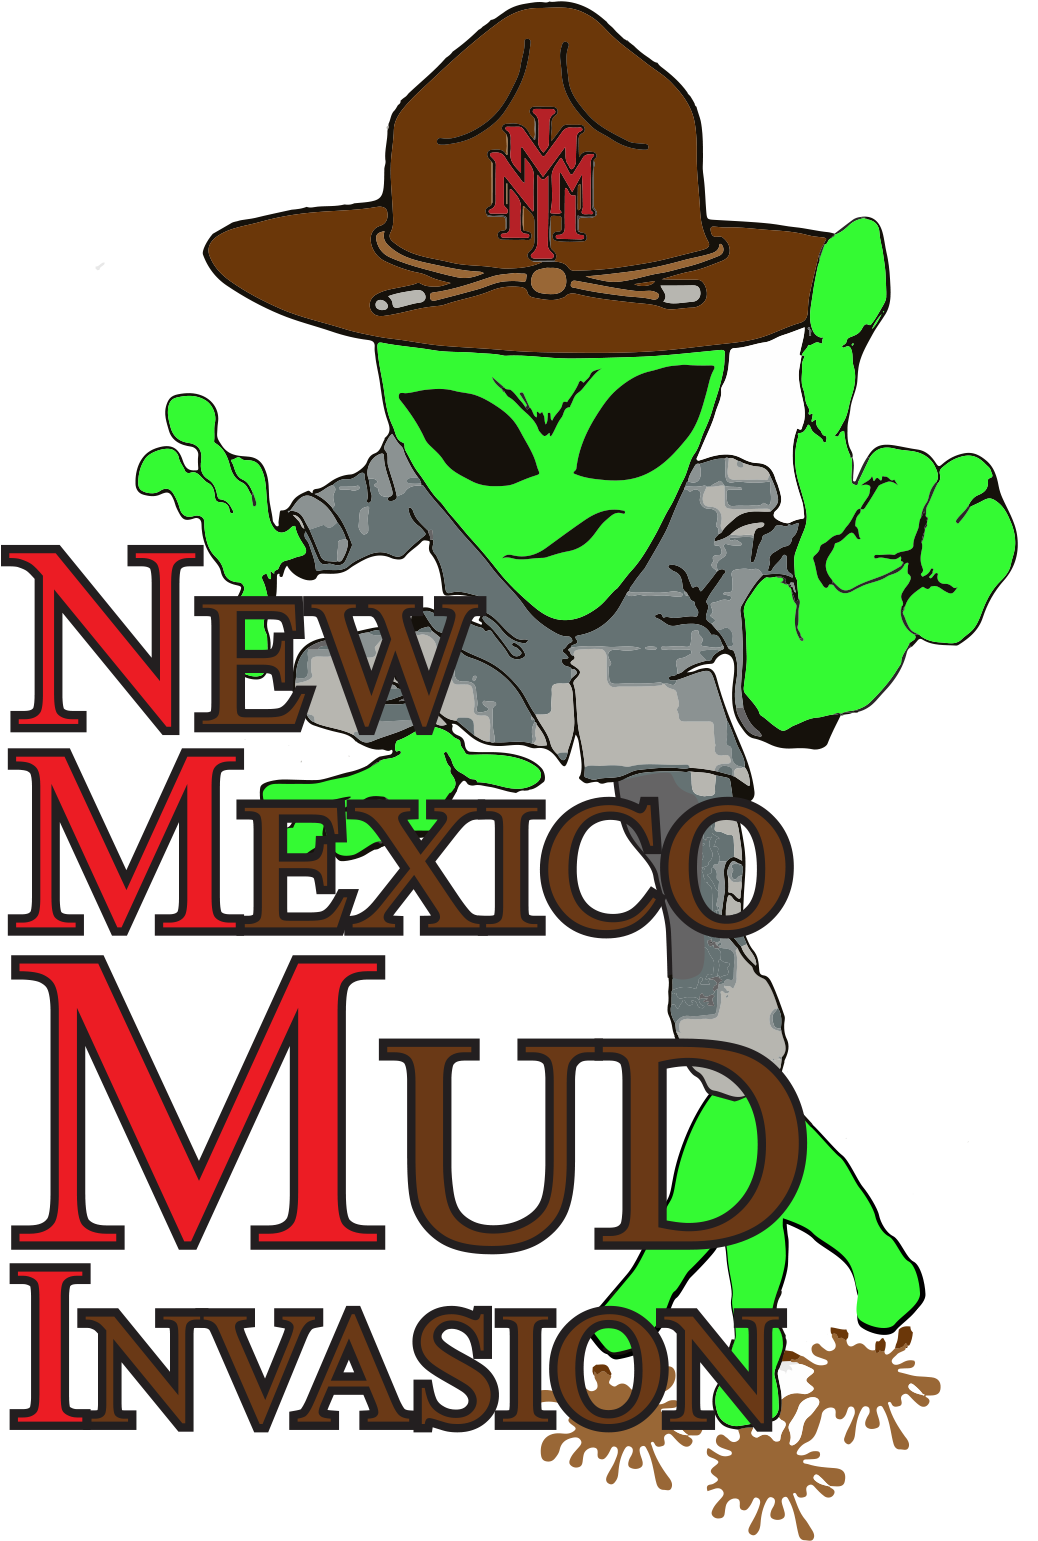 New Mexico Mud Invasion Weekend Roswell, Nm New Mexico - New Mexico (1065x1541)